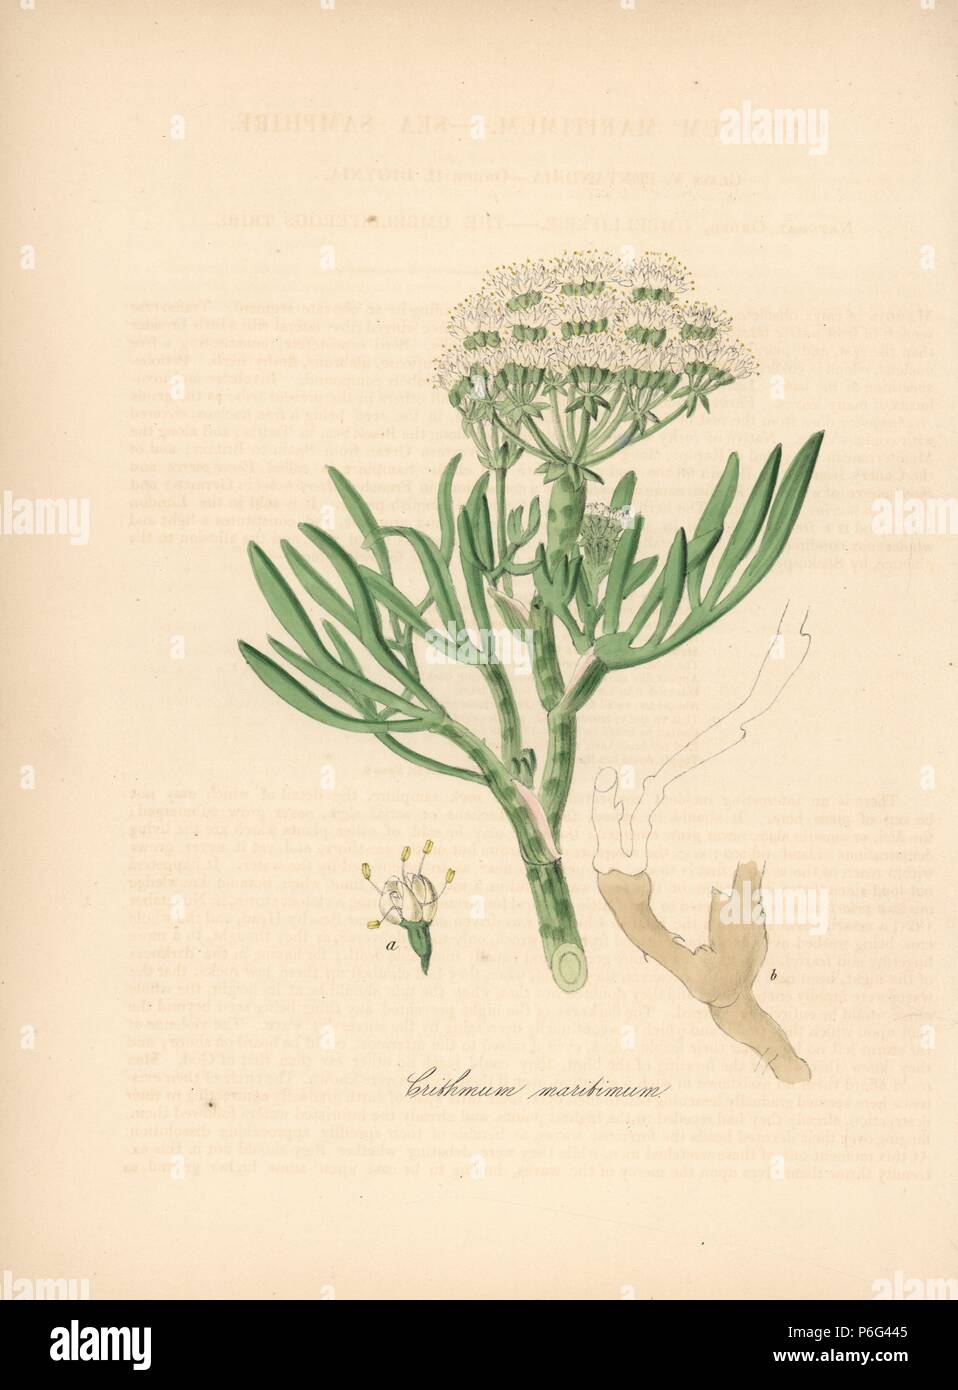 Sea samphire, Crithmum maritimum. Handcoloured zincograph by C. Chabot drawn by Miss M. A. Burnett from her 'Plantae Utiliores: or Illustrations of Useful Plants,' Whittaker, London, 1842. Miss Burnett drew the botanical illustrations, but the text was chiefly by her late brother, British botanist Gilbert Thomas Burnett (1800-1835). Stock Photo